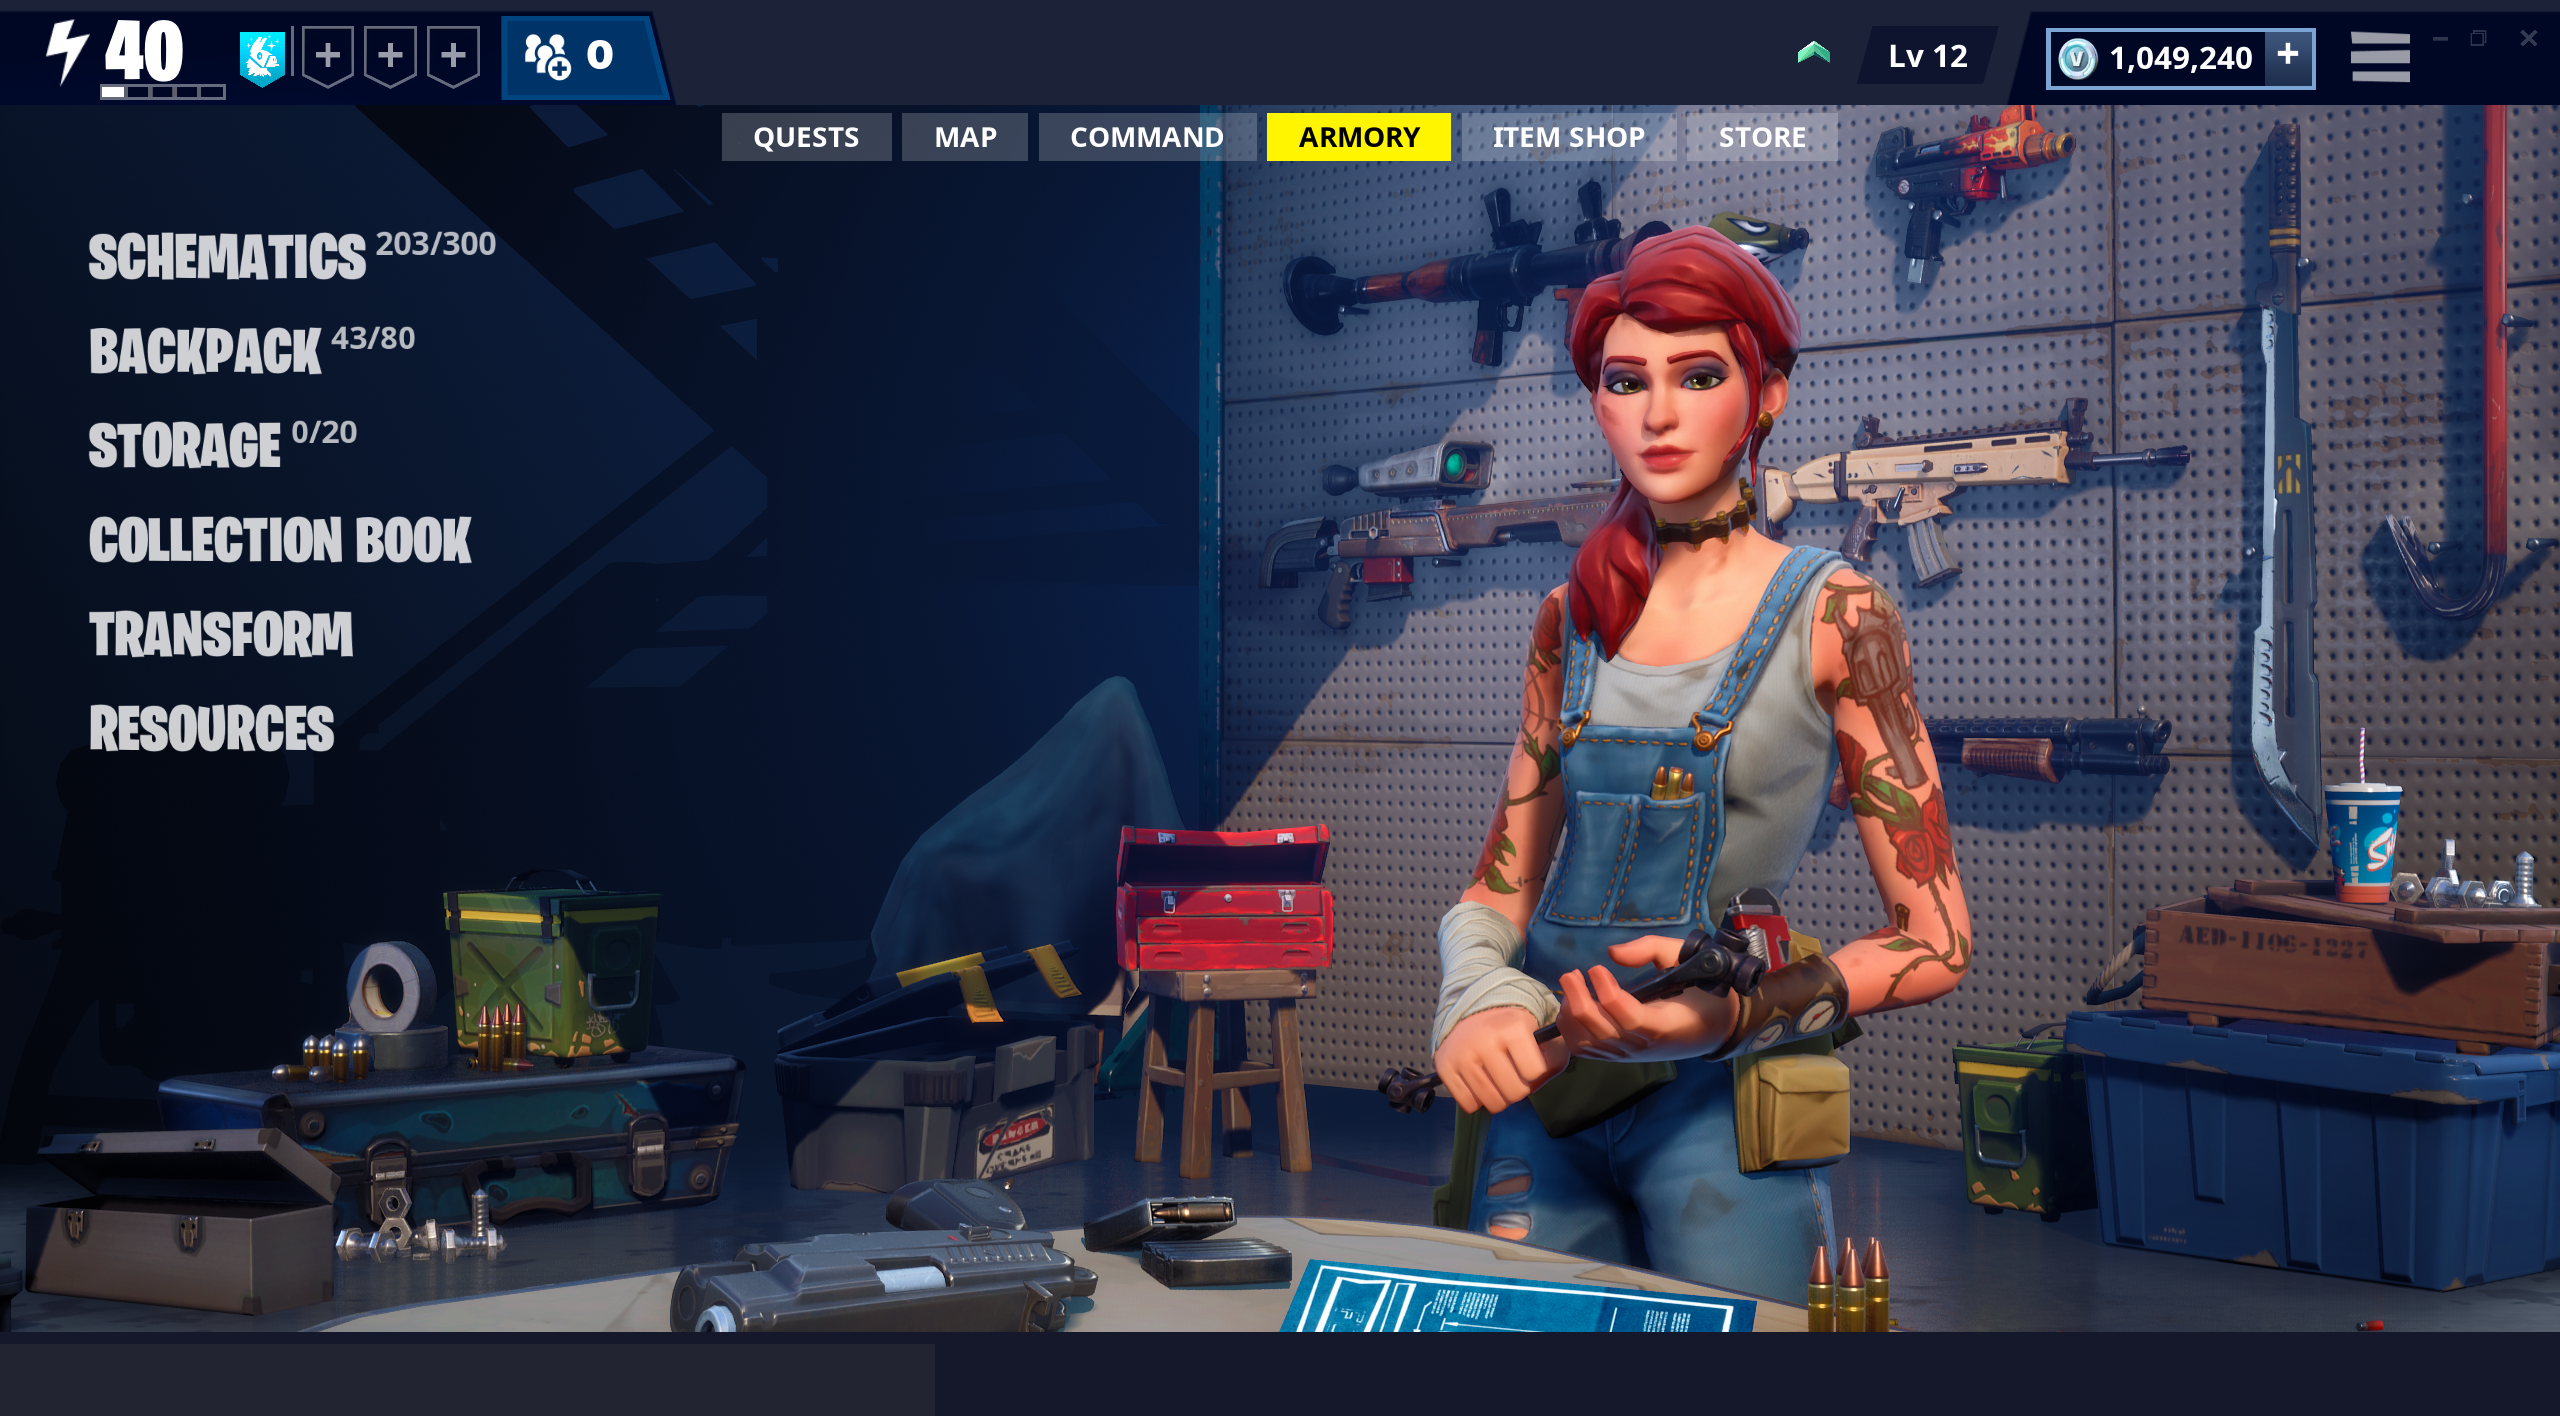 right click view image for full resolution - fortnite armory slot